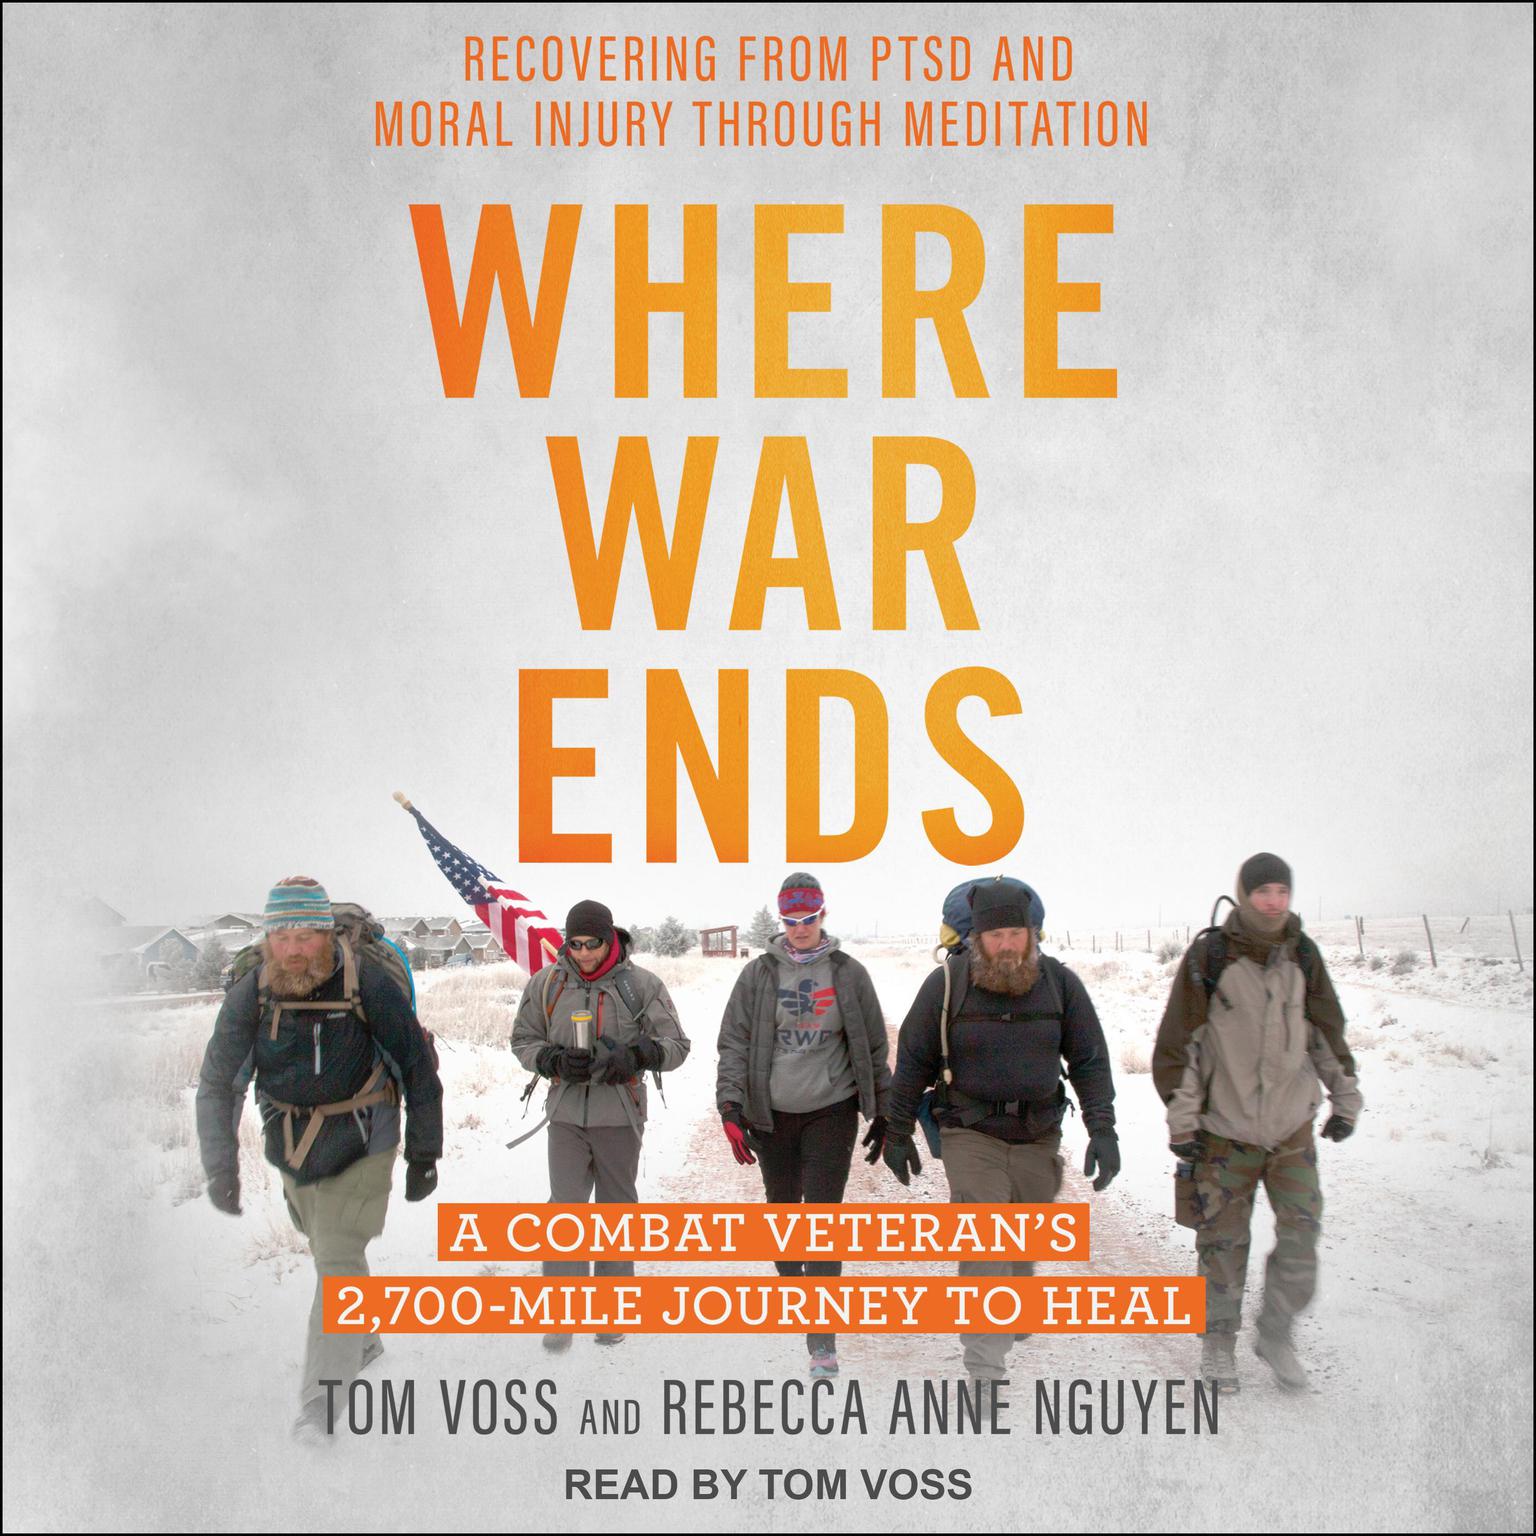 Where War Ends: A Combat Veteran’s 2,700-Mile Journey to Heal—Recovering from PTSD and Moral Injury through Meditation Audiobook, by Rebecca Anne Nguyen